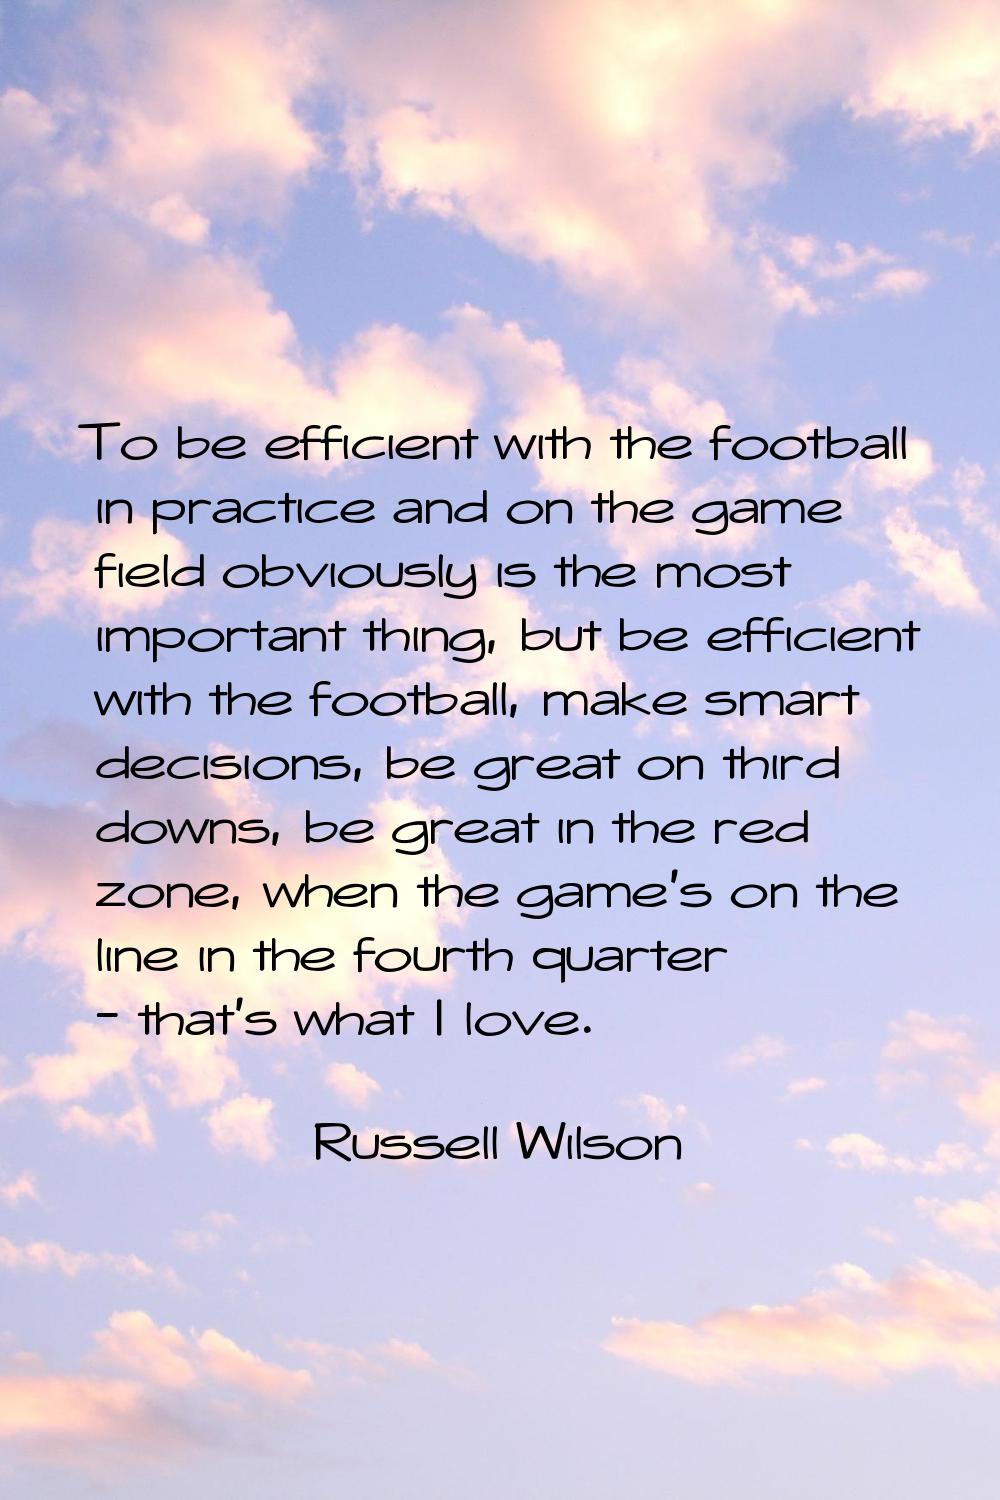 To be efficient with the football in practice and on the game field obviously is the most important